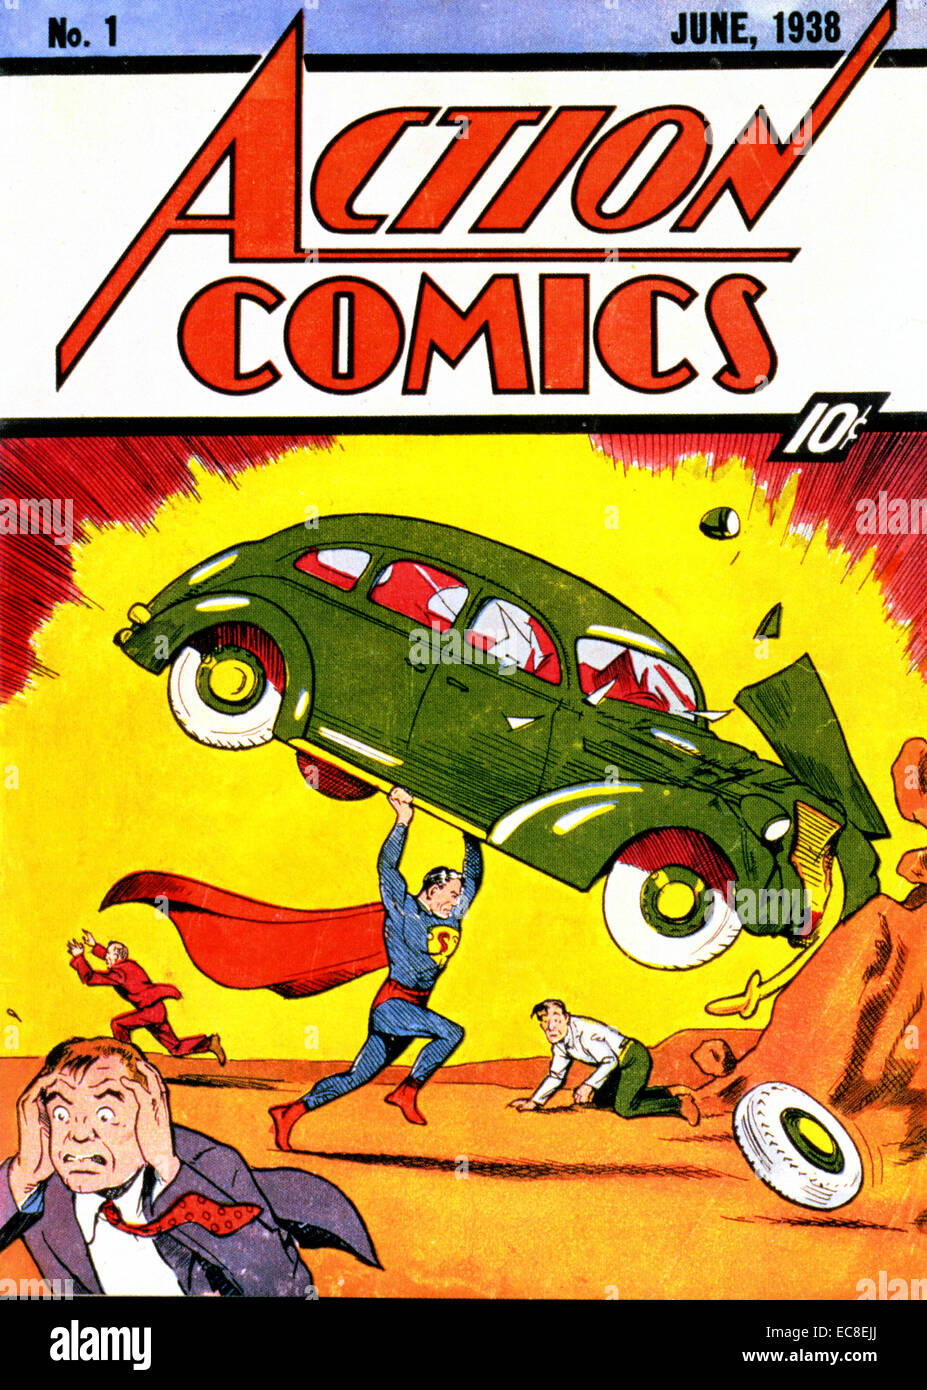 ACTION COMICS No 1 published in June 1938 with the first appearance of Superman Stock Photo